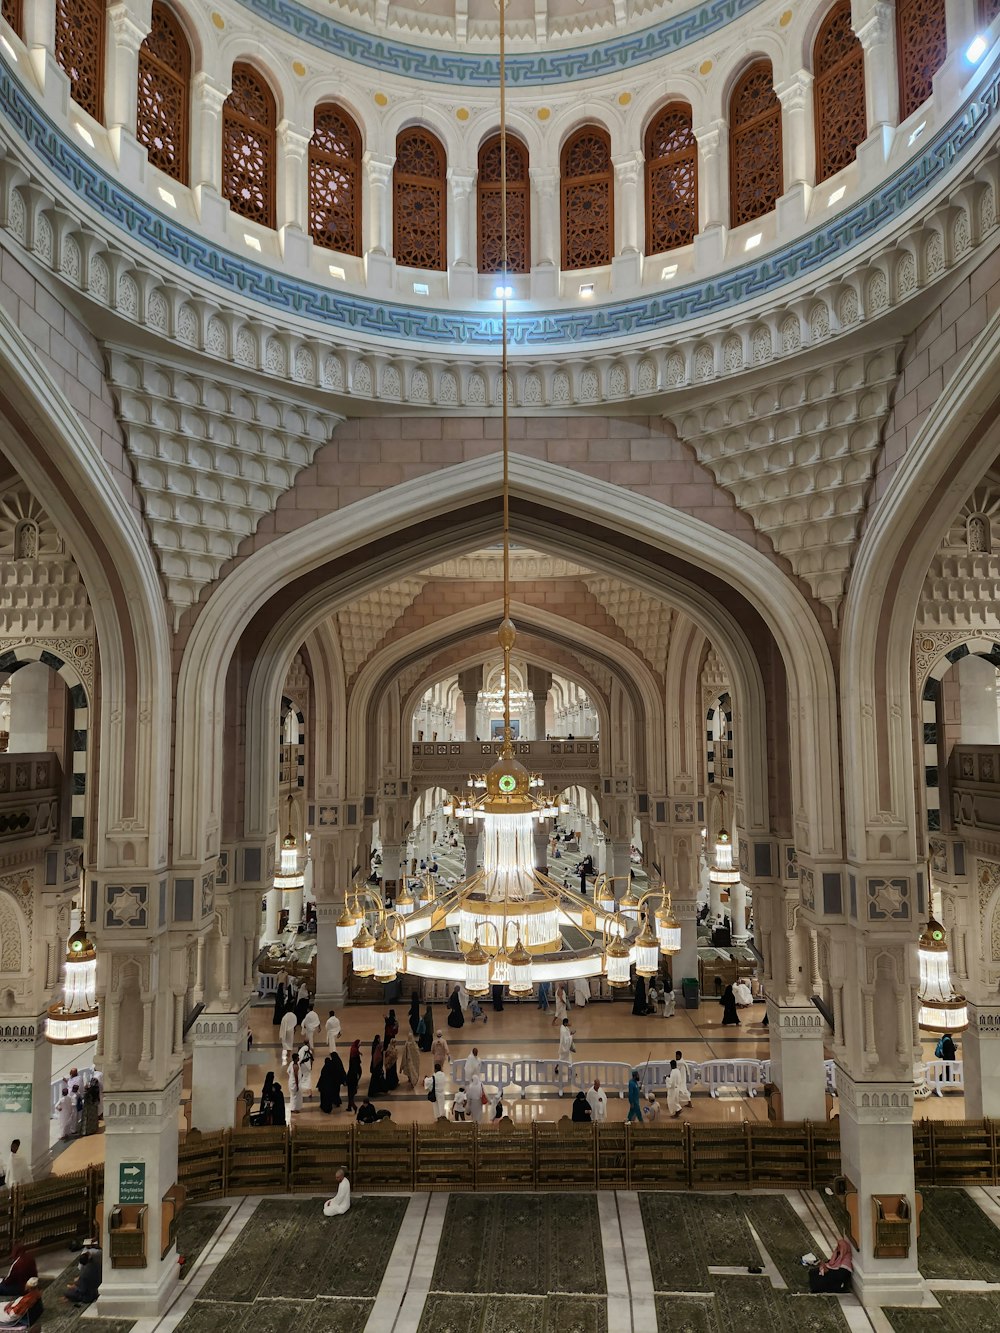 the inside of a large building with a domed ceiling